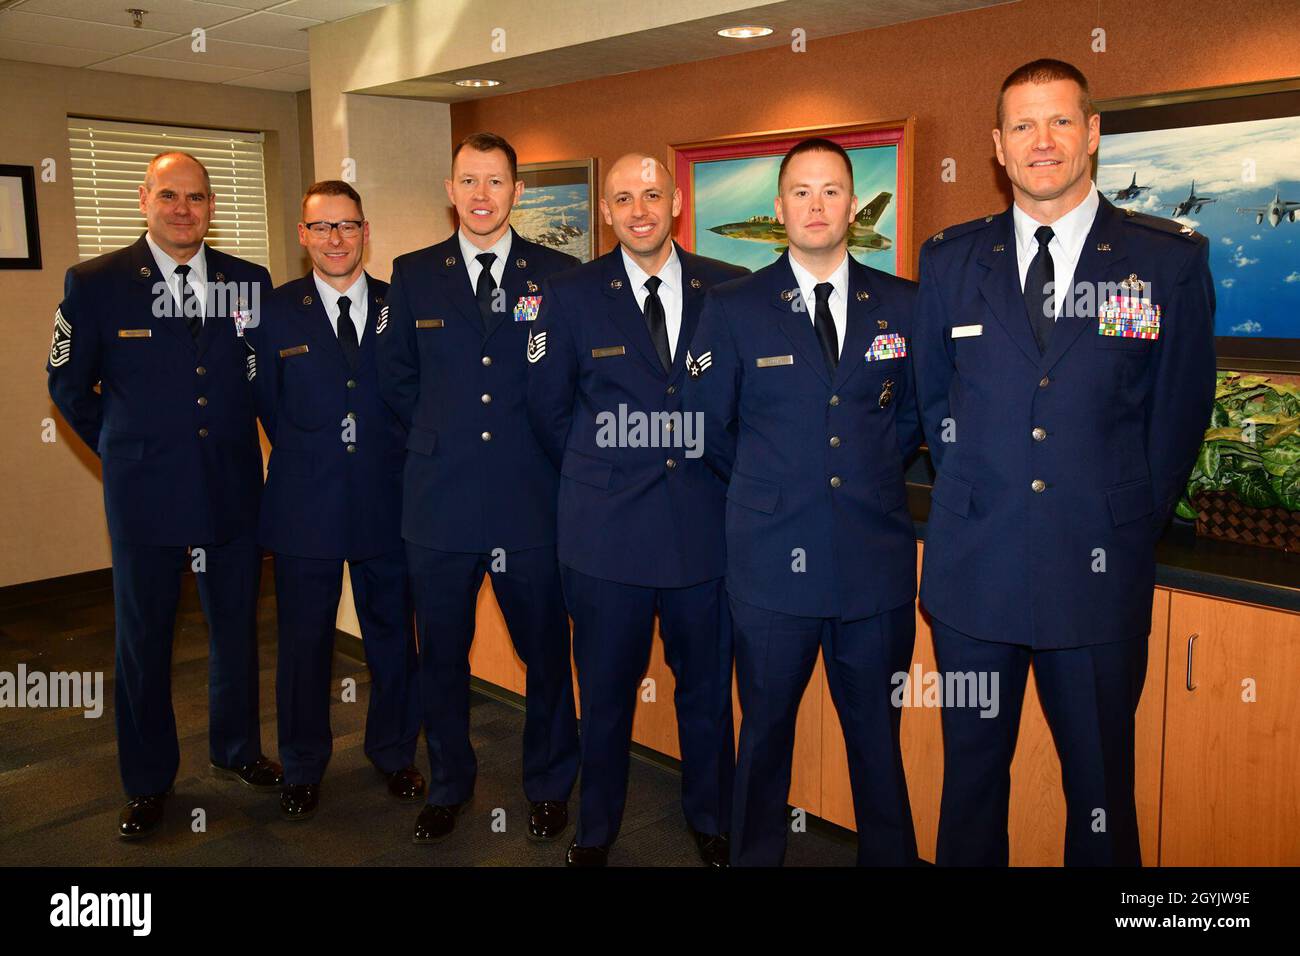 Chief Master Sgt. Mark Rukavina, Minnesota State Command Chief; Master Sgt. Richard Kaufman, Master Sgt Chris Armstrong, Tech Sgt. George Wexler, Senior Airmen Jeffrey Fouts and Col. Brian Mandt, Vice Chief of Staff Minnesota Air National Guard pose for a group photo on Jan. 10, 2020 right after a ceremony in Duluth, Minn. Kaufman, Armstrong, Wexler and Fouts were named the 2020 Airmen of the Year for the state of Minnesota based on 2019 accomplishments. (U.S. Air National Guard photo by Audra Flanagan) Stock Photo